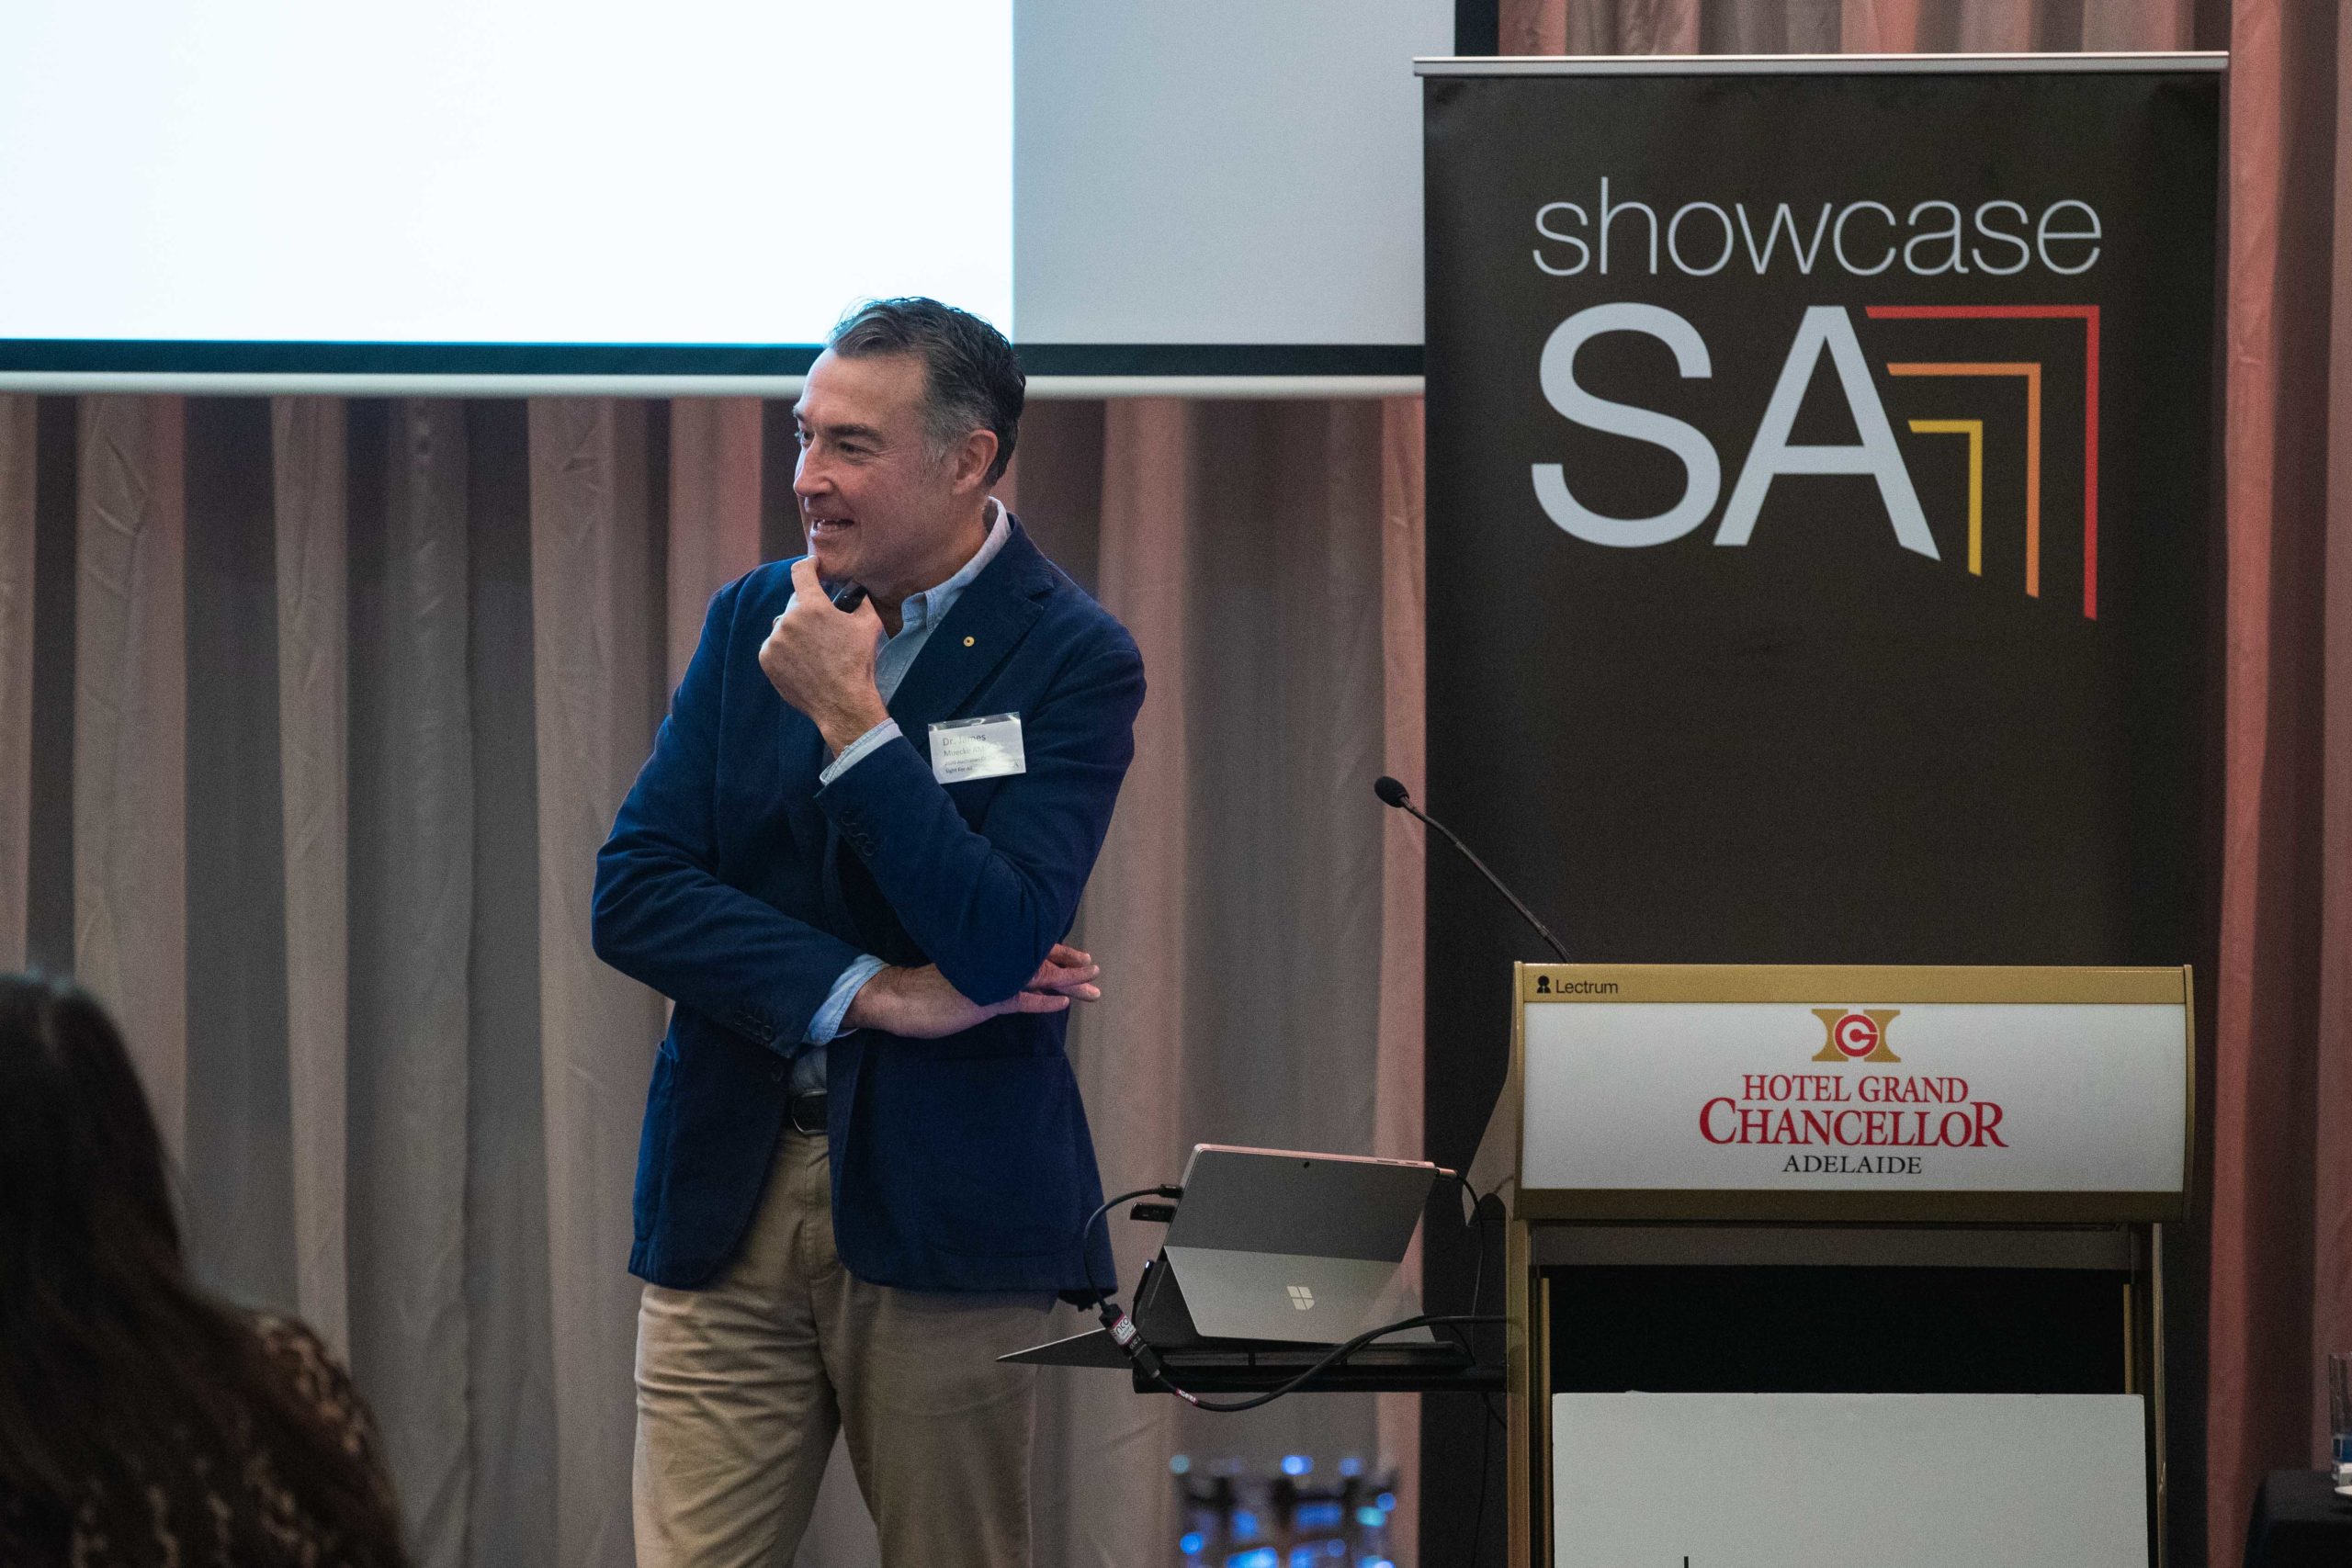 Showcase SA Industry Insight: Health Presented by Australian of the Year, Dr James Muecke at Hotel Grand Chancellor Adelaide (June 2020) photos: Matthew Kroker